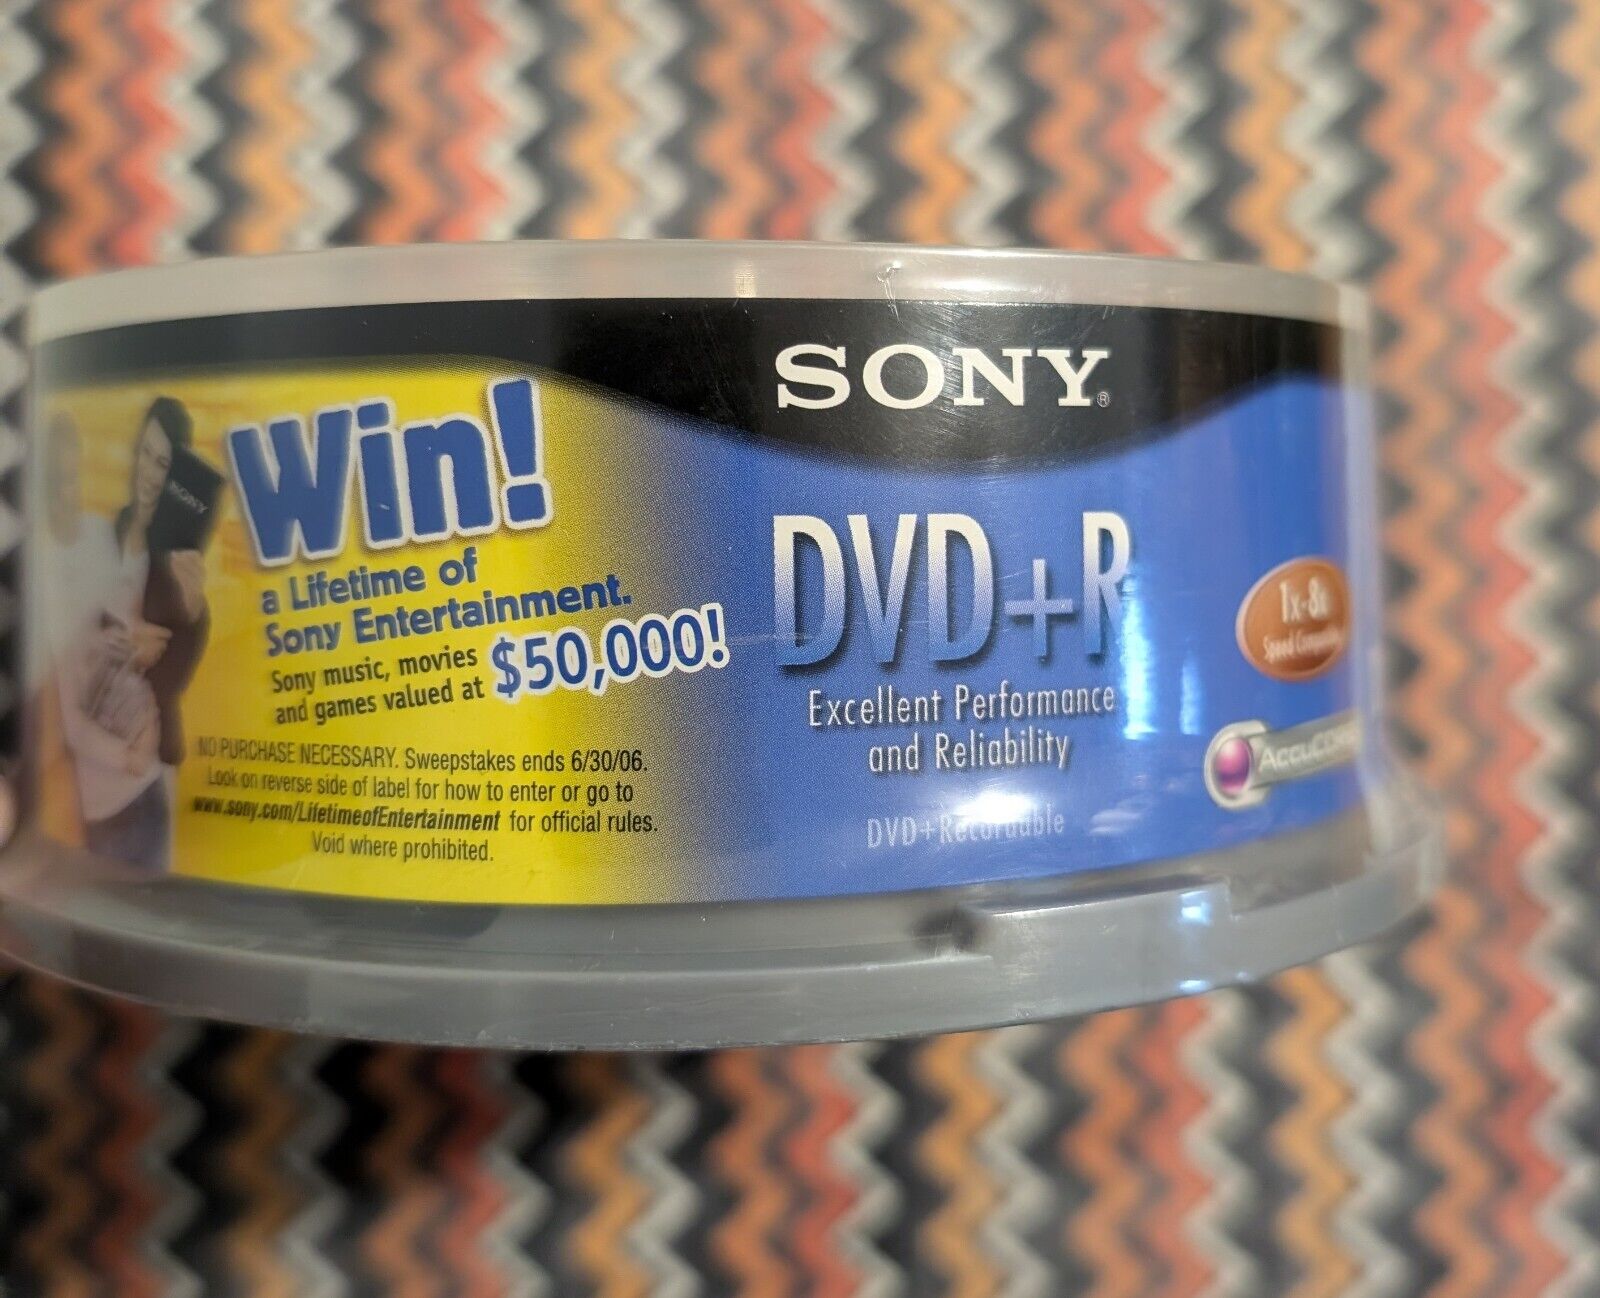 Sony DVD + R (2005) 25 Pack Spindle - 4.7GB 120 Min Discs Blank Recordable Media